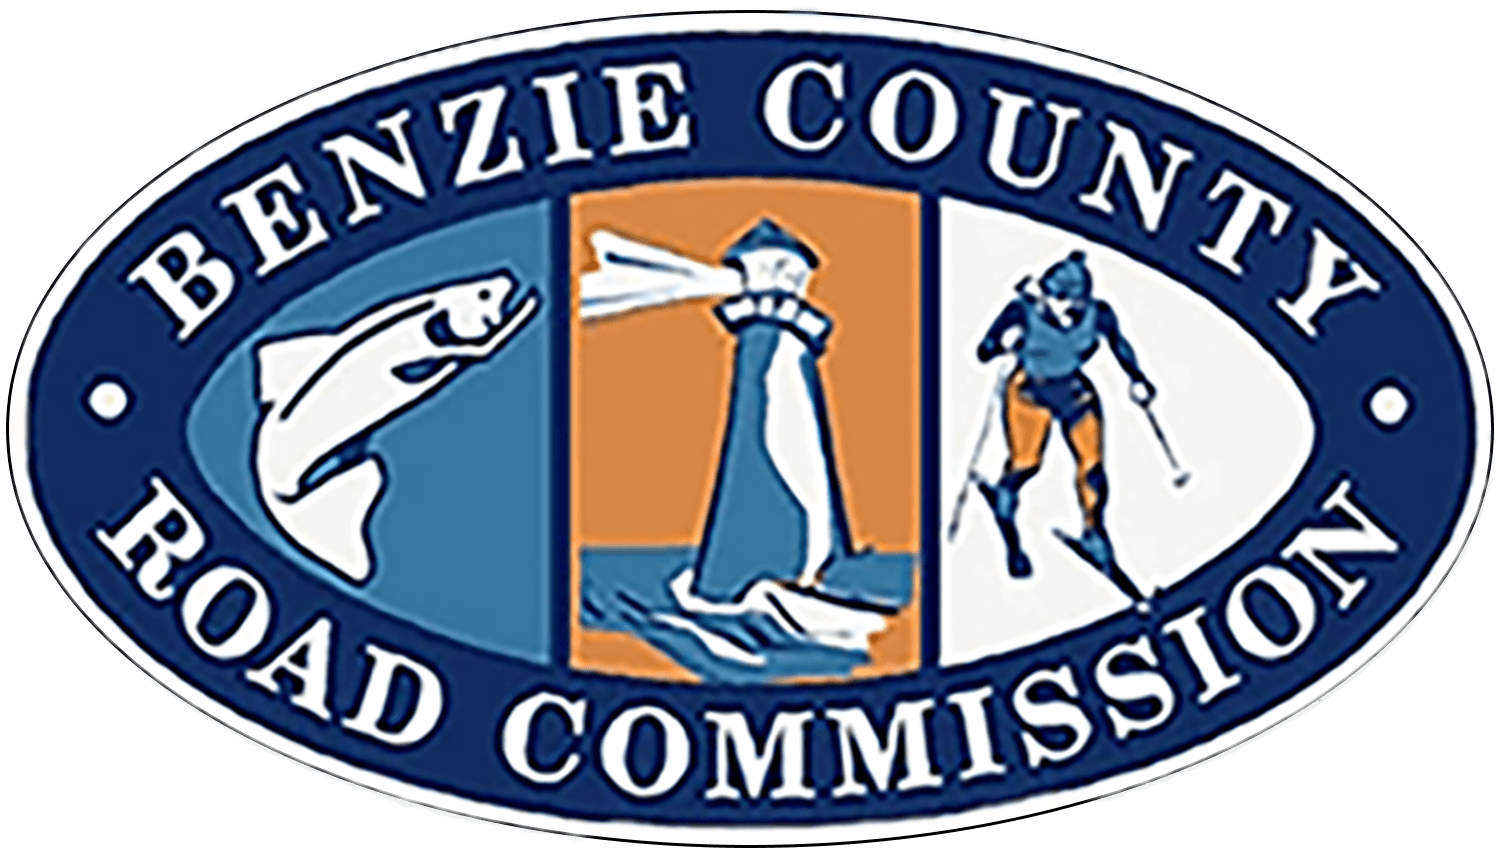 Benzie County Road Commission